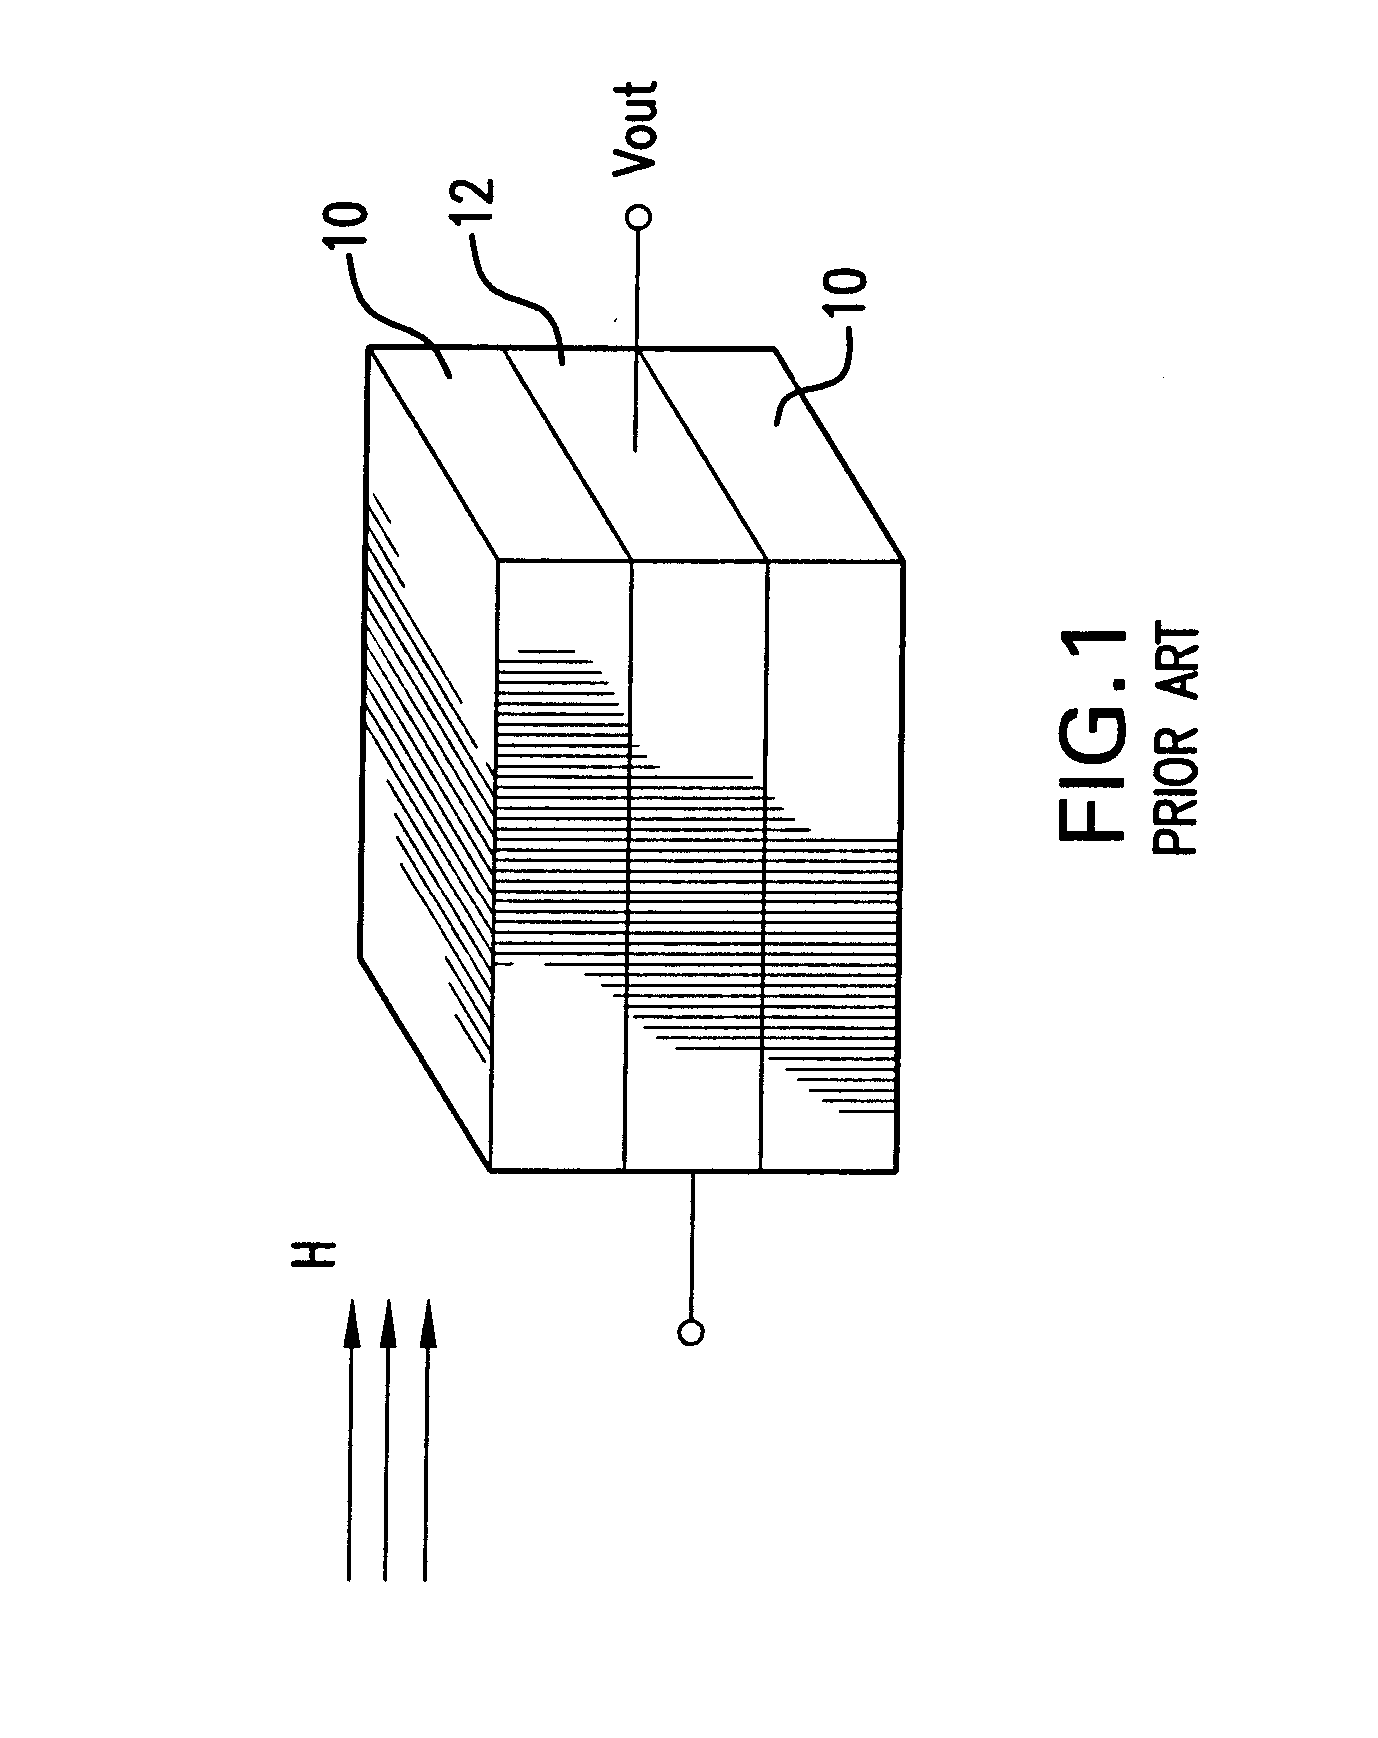 Ultrasensitive magnetoelectric thin film magnetometer and method of fabrication